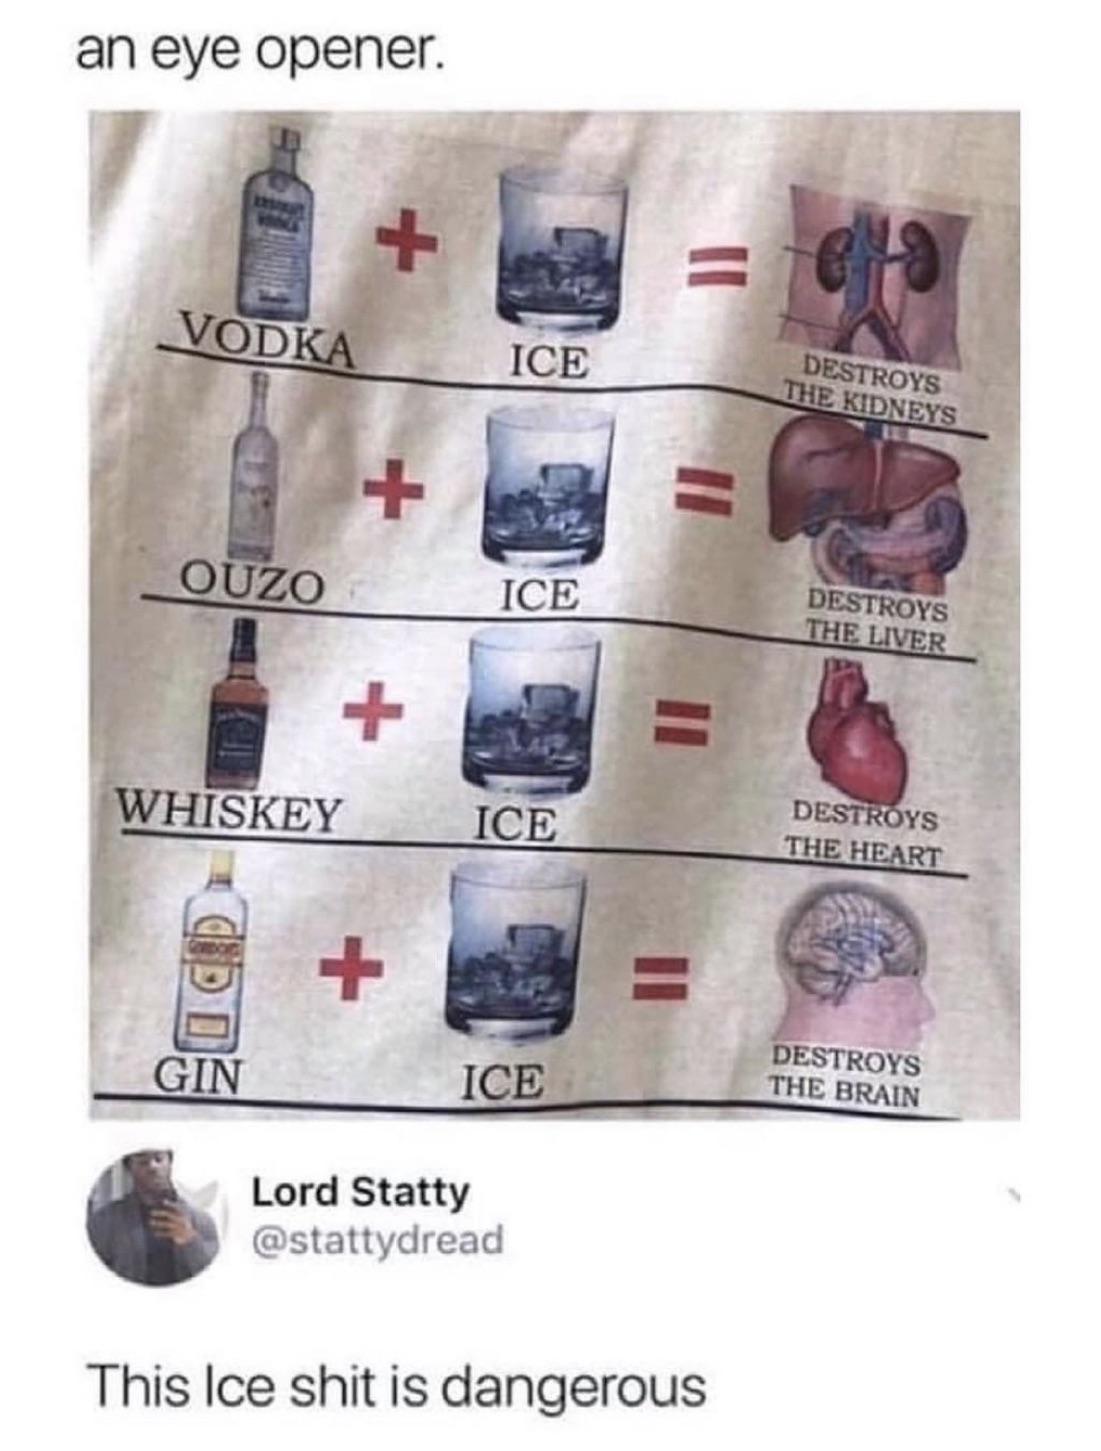 ice is dangerous meme - an eye opener. Vodka Ouzo Whiskey Gin Ice Ice Ice Ice Lord Statty This Ice shit is dangerous els Destroys The Kidneys Destroys The Liver Destroys The Heart Destroys The Brain